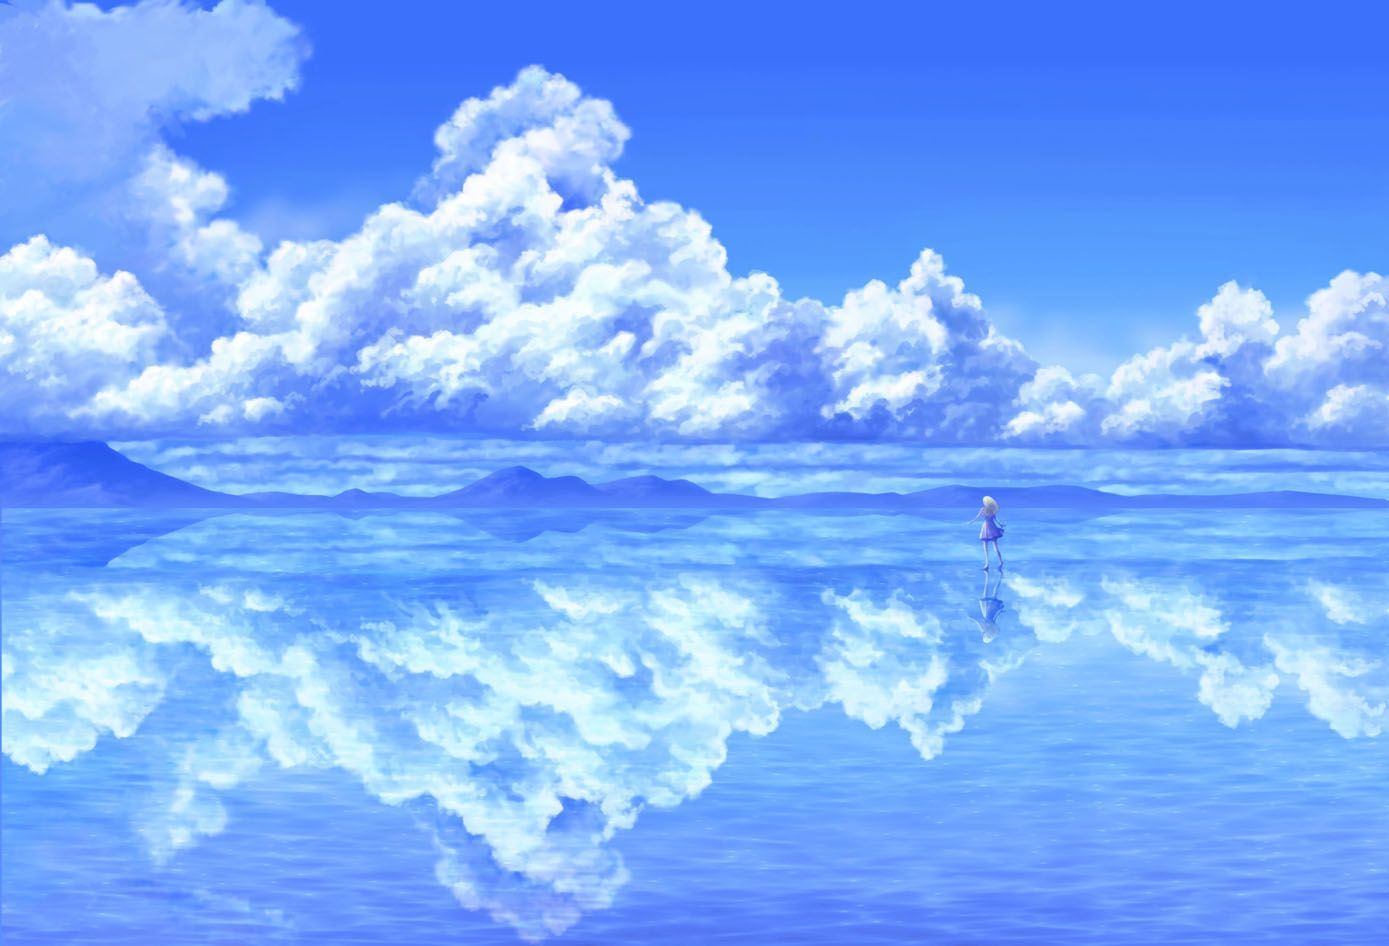 Sea And Cluds wallpaper. Anime background wallpaper, Anime